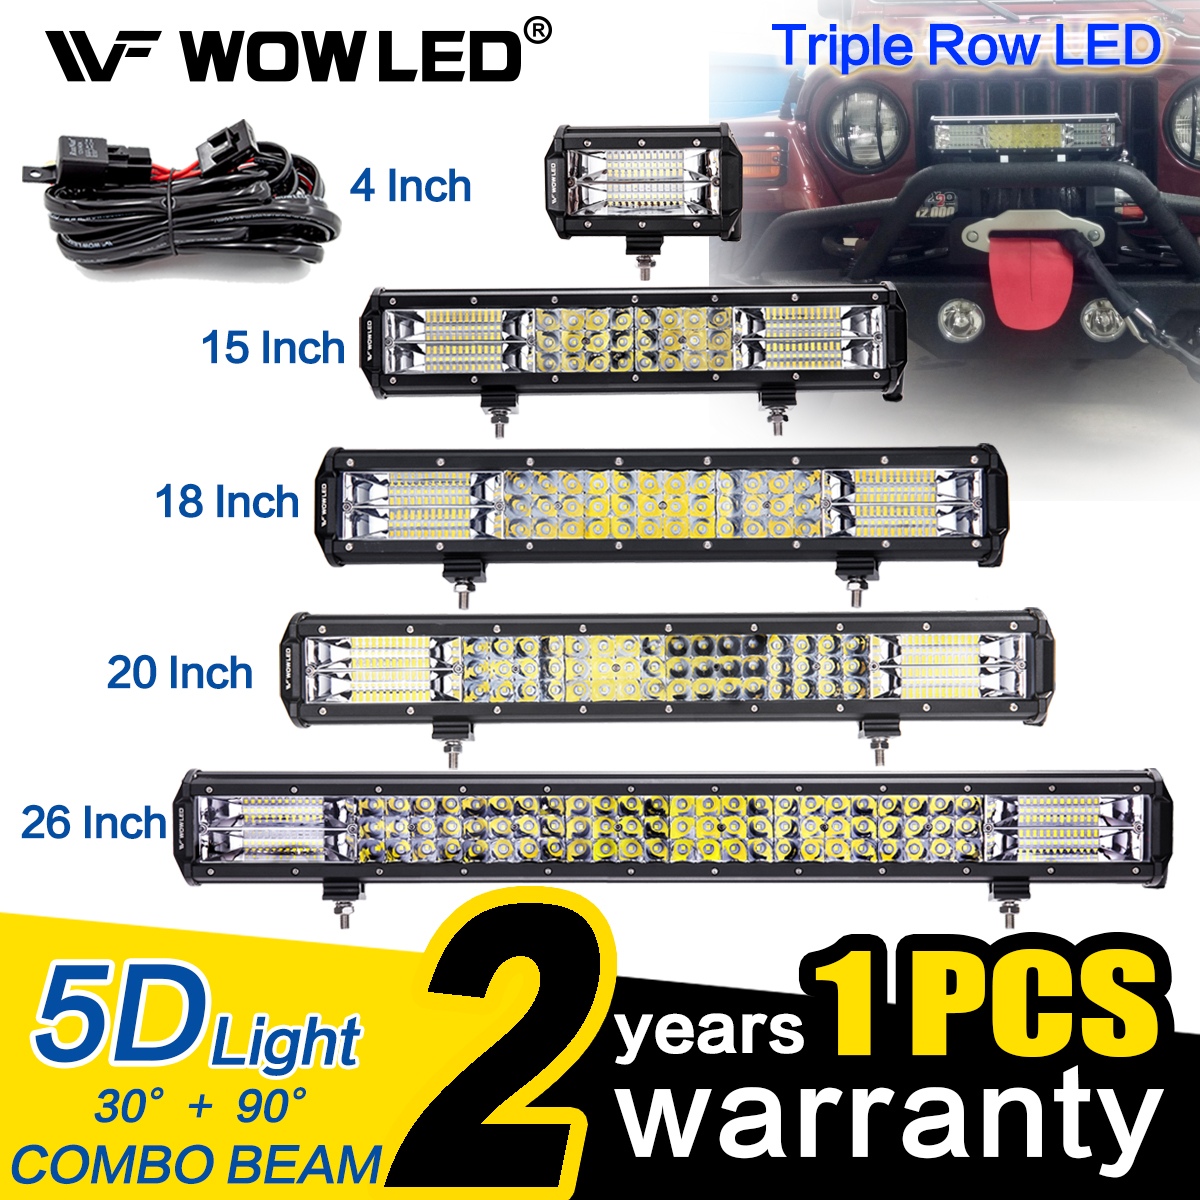 Triple Rows Upgrade Off Road Lights Light Bar WOWLED Light Bar 2 x 5 Inch 72W Yellow Amber Flood LED Light Bars IP67 Offroad Driving Lamp Bar for Car Truck UTE 4x4 12V 24V